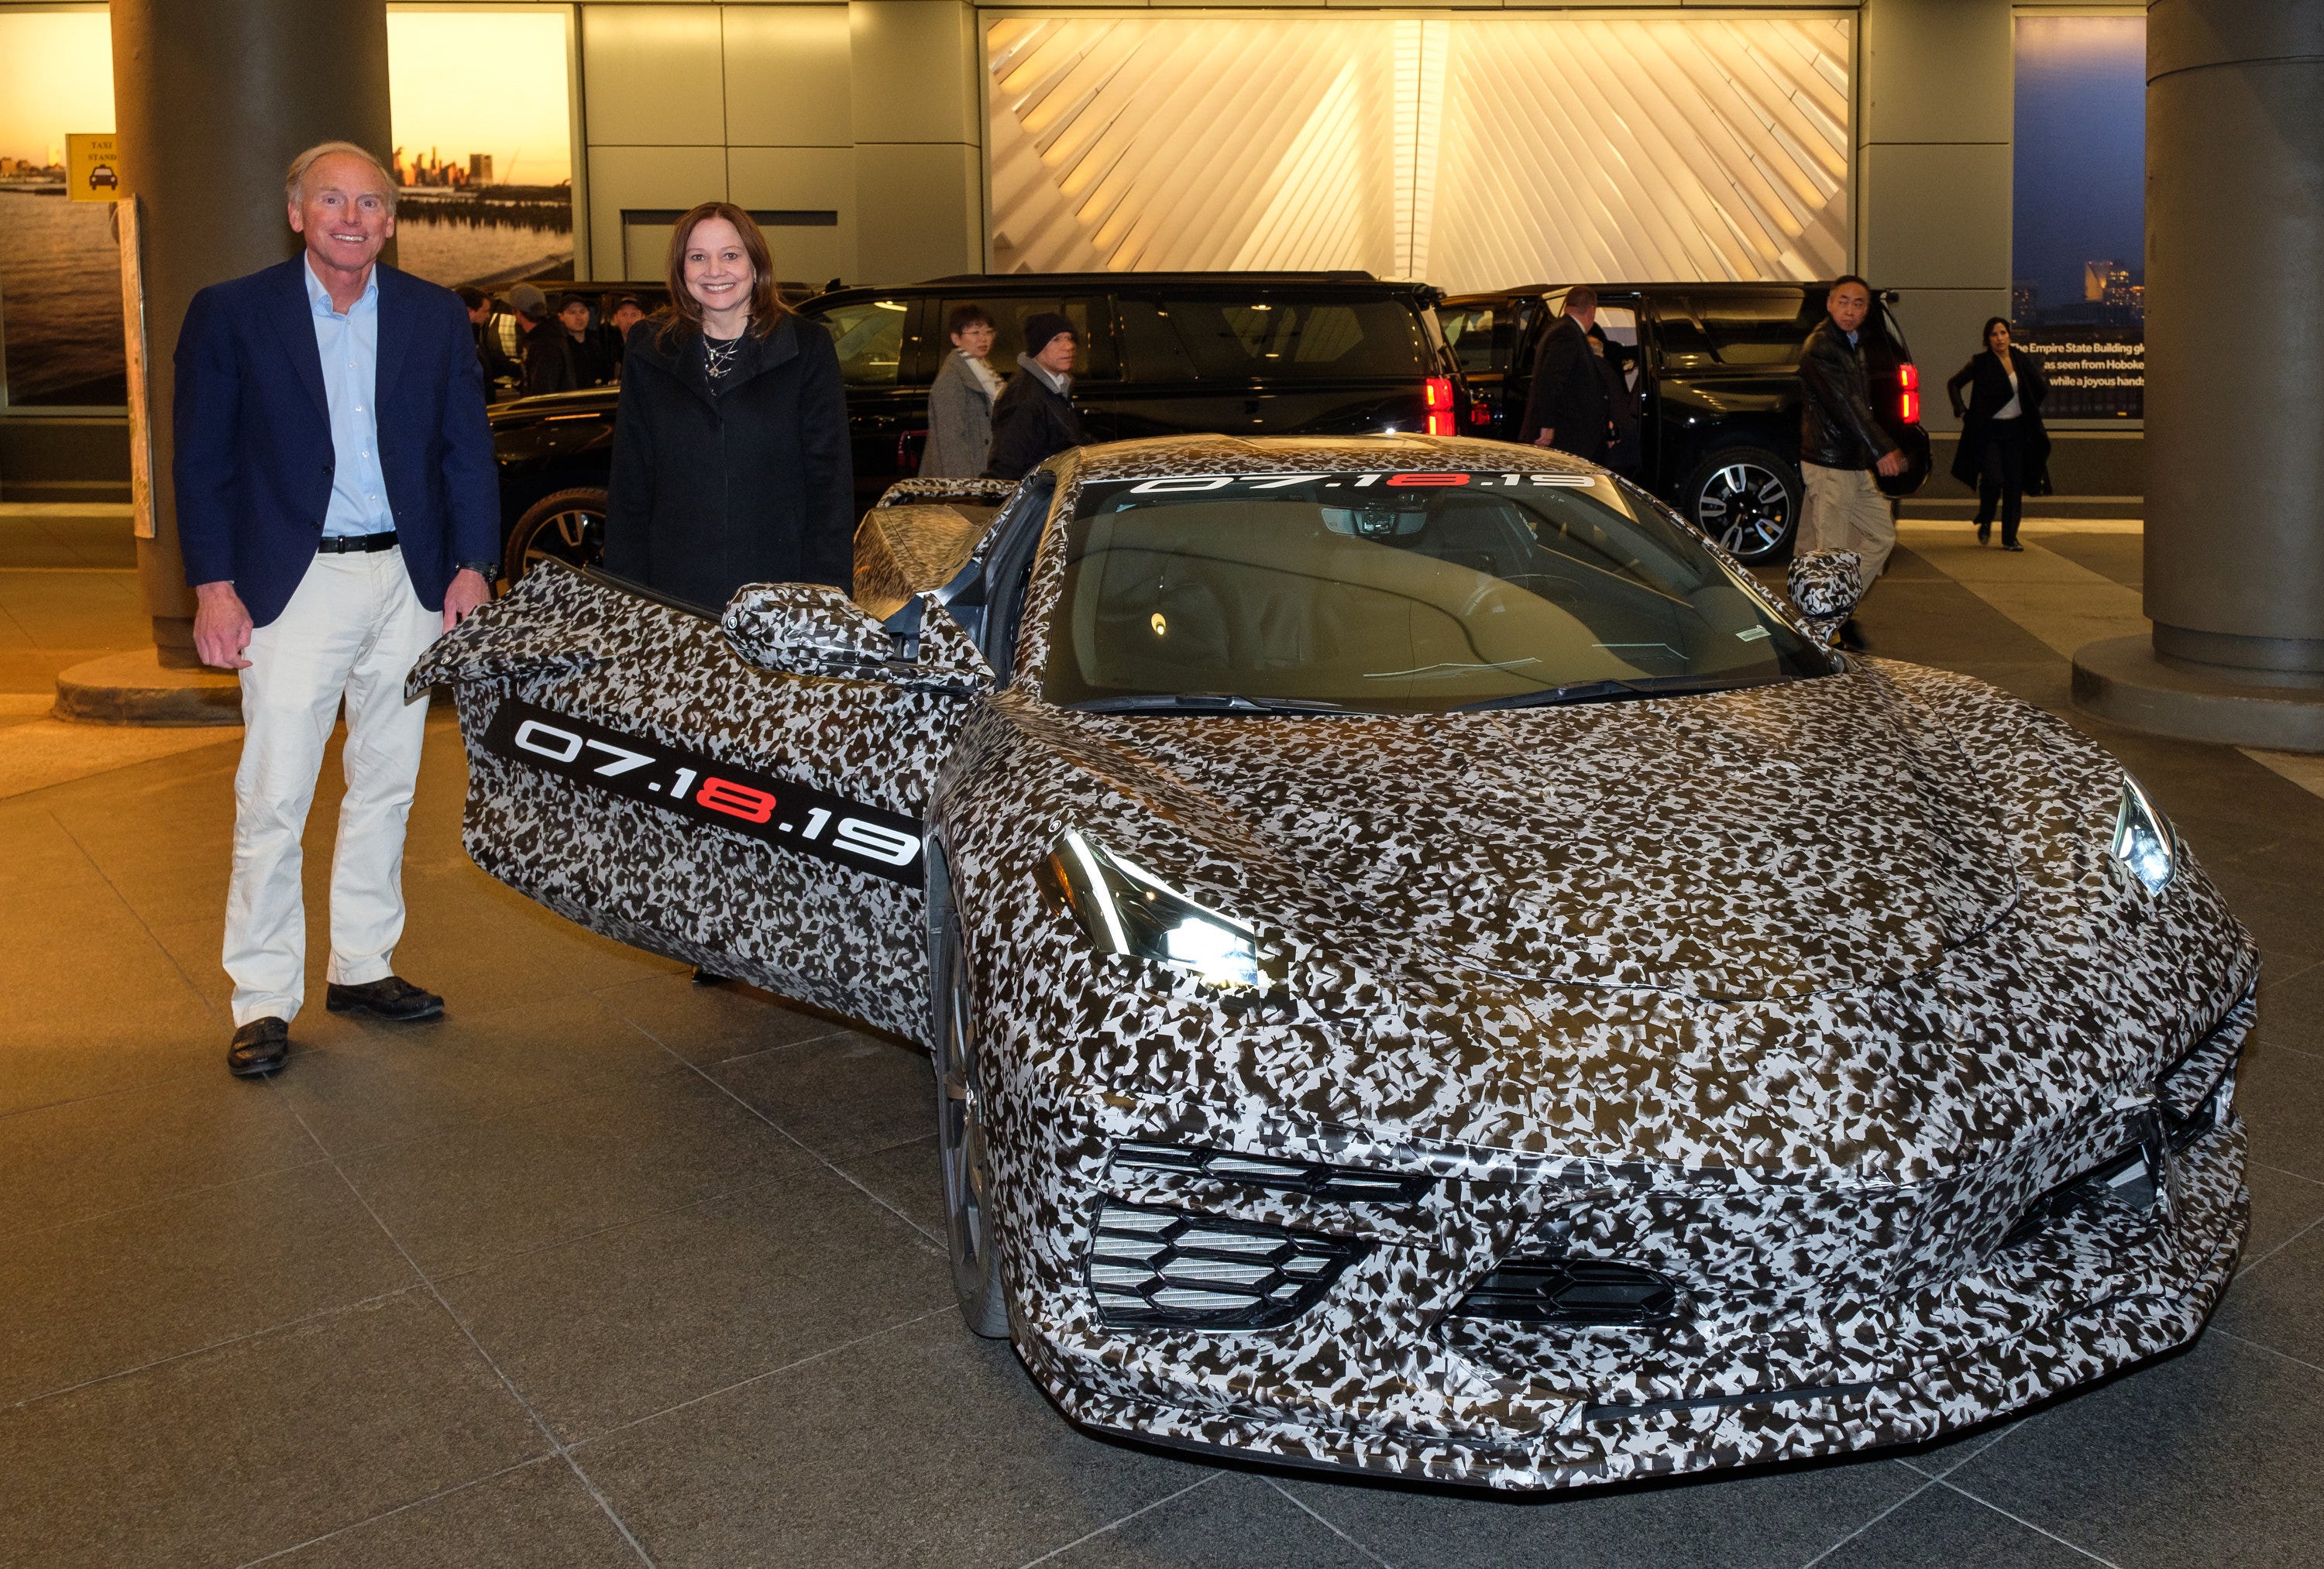 Chevrolet Corvette Chief Engineer Tadge Juechter and General Motors Chairman and CEO Mary Barra Thursday, April 11, 2019 with a camouflaged next generation Corvette near Times Square in New York City.